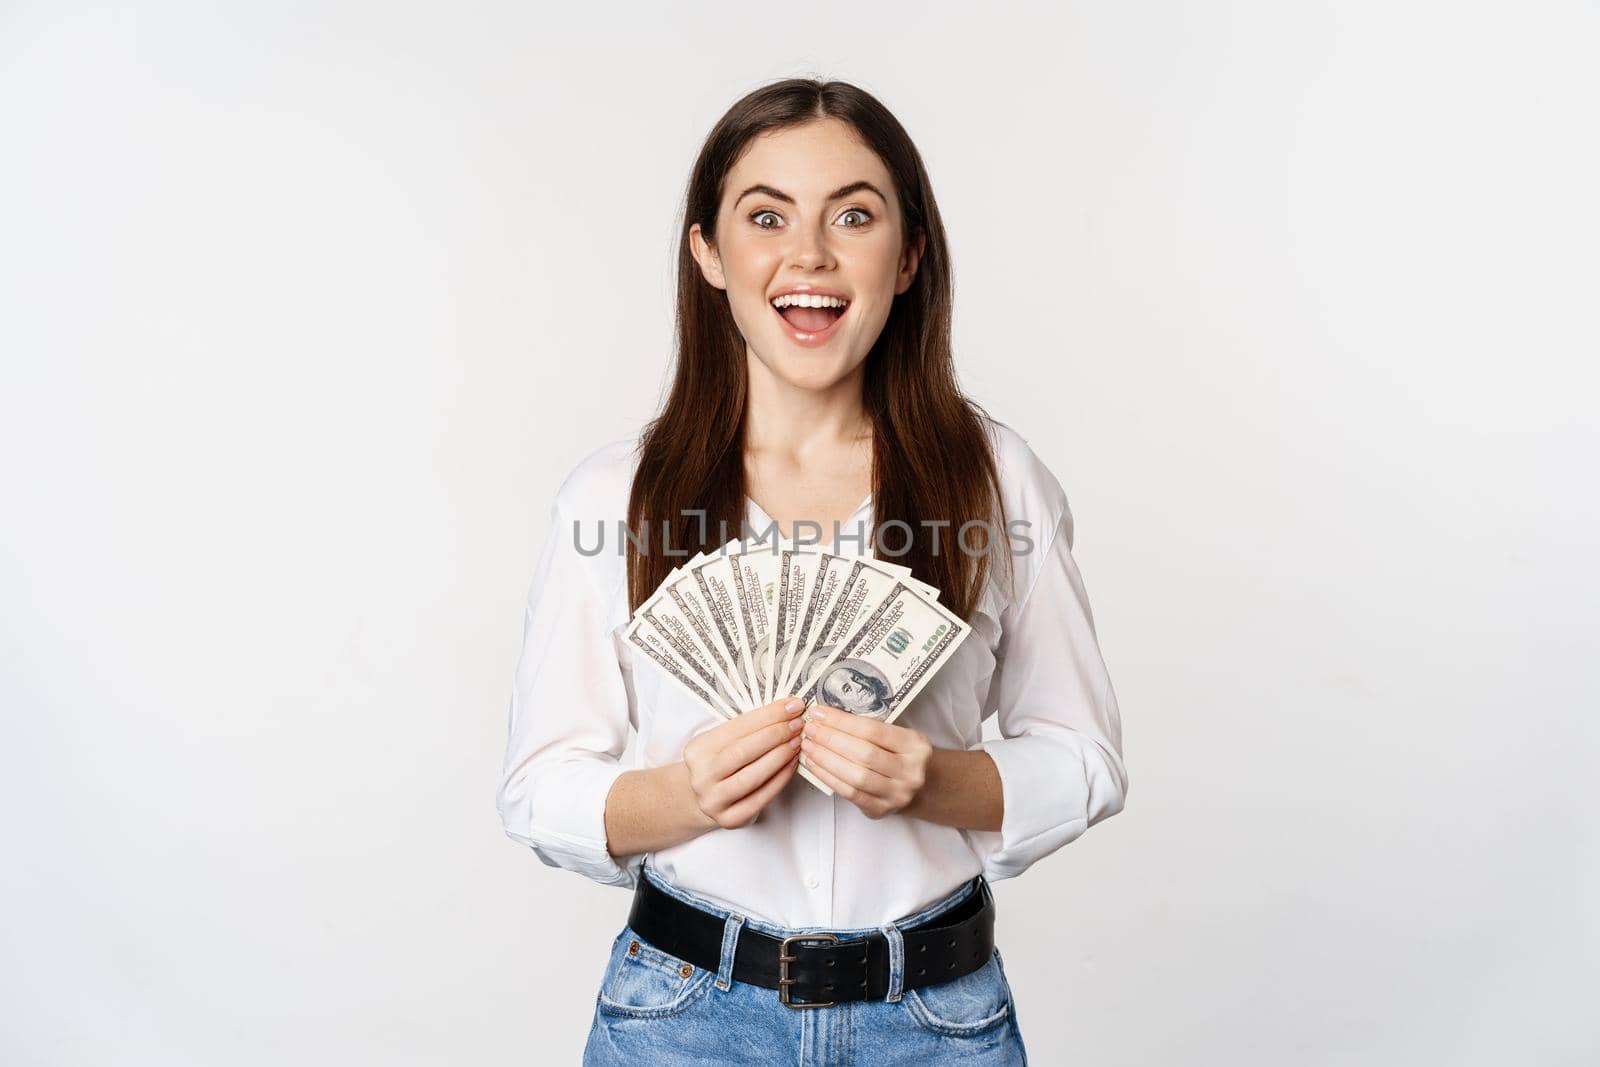 Portrait of beautiful woman holding money, cash, smiling pleased, standing over white background. Copy space